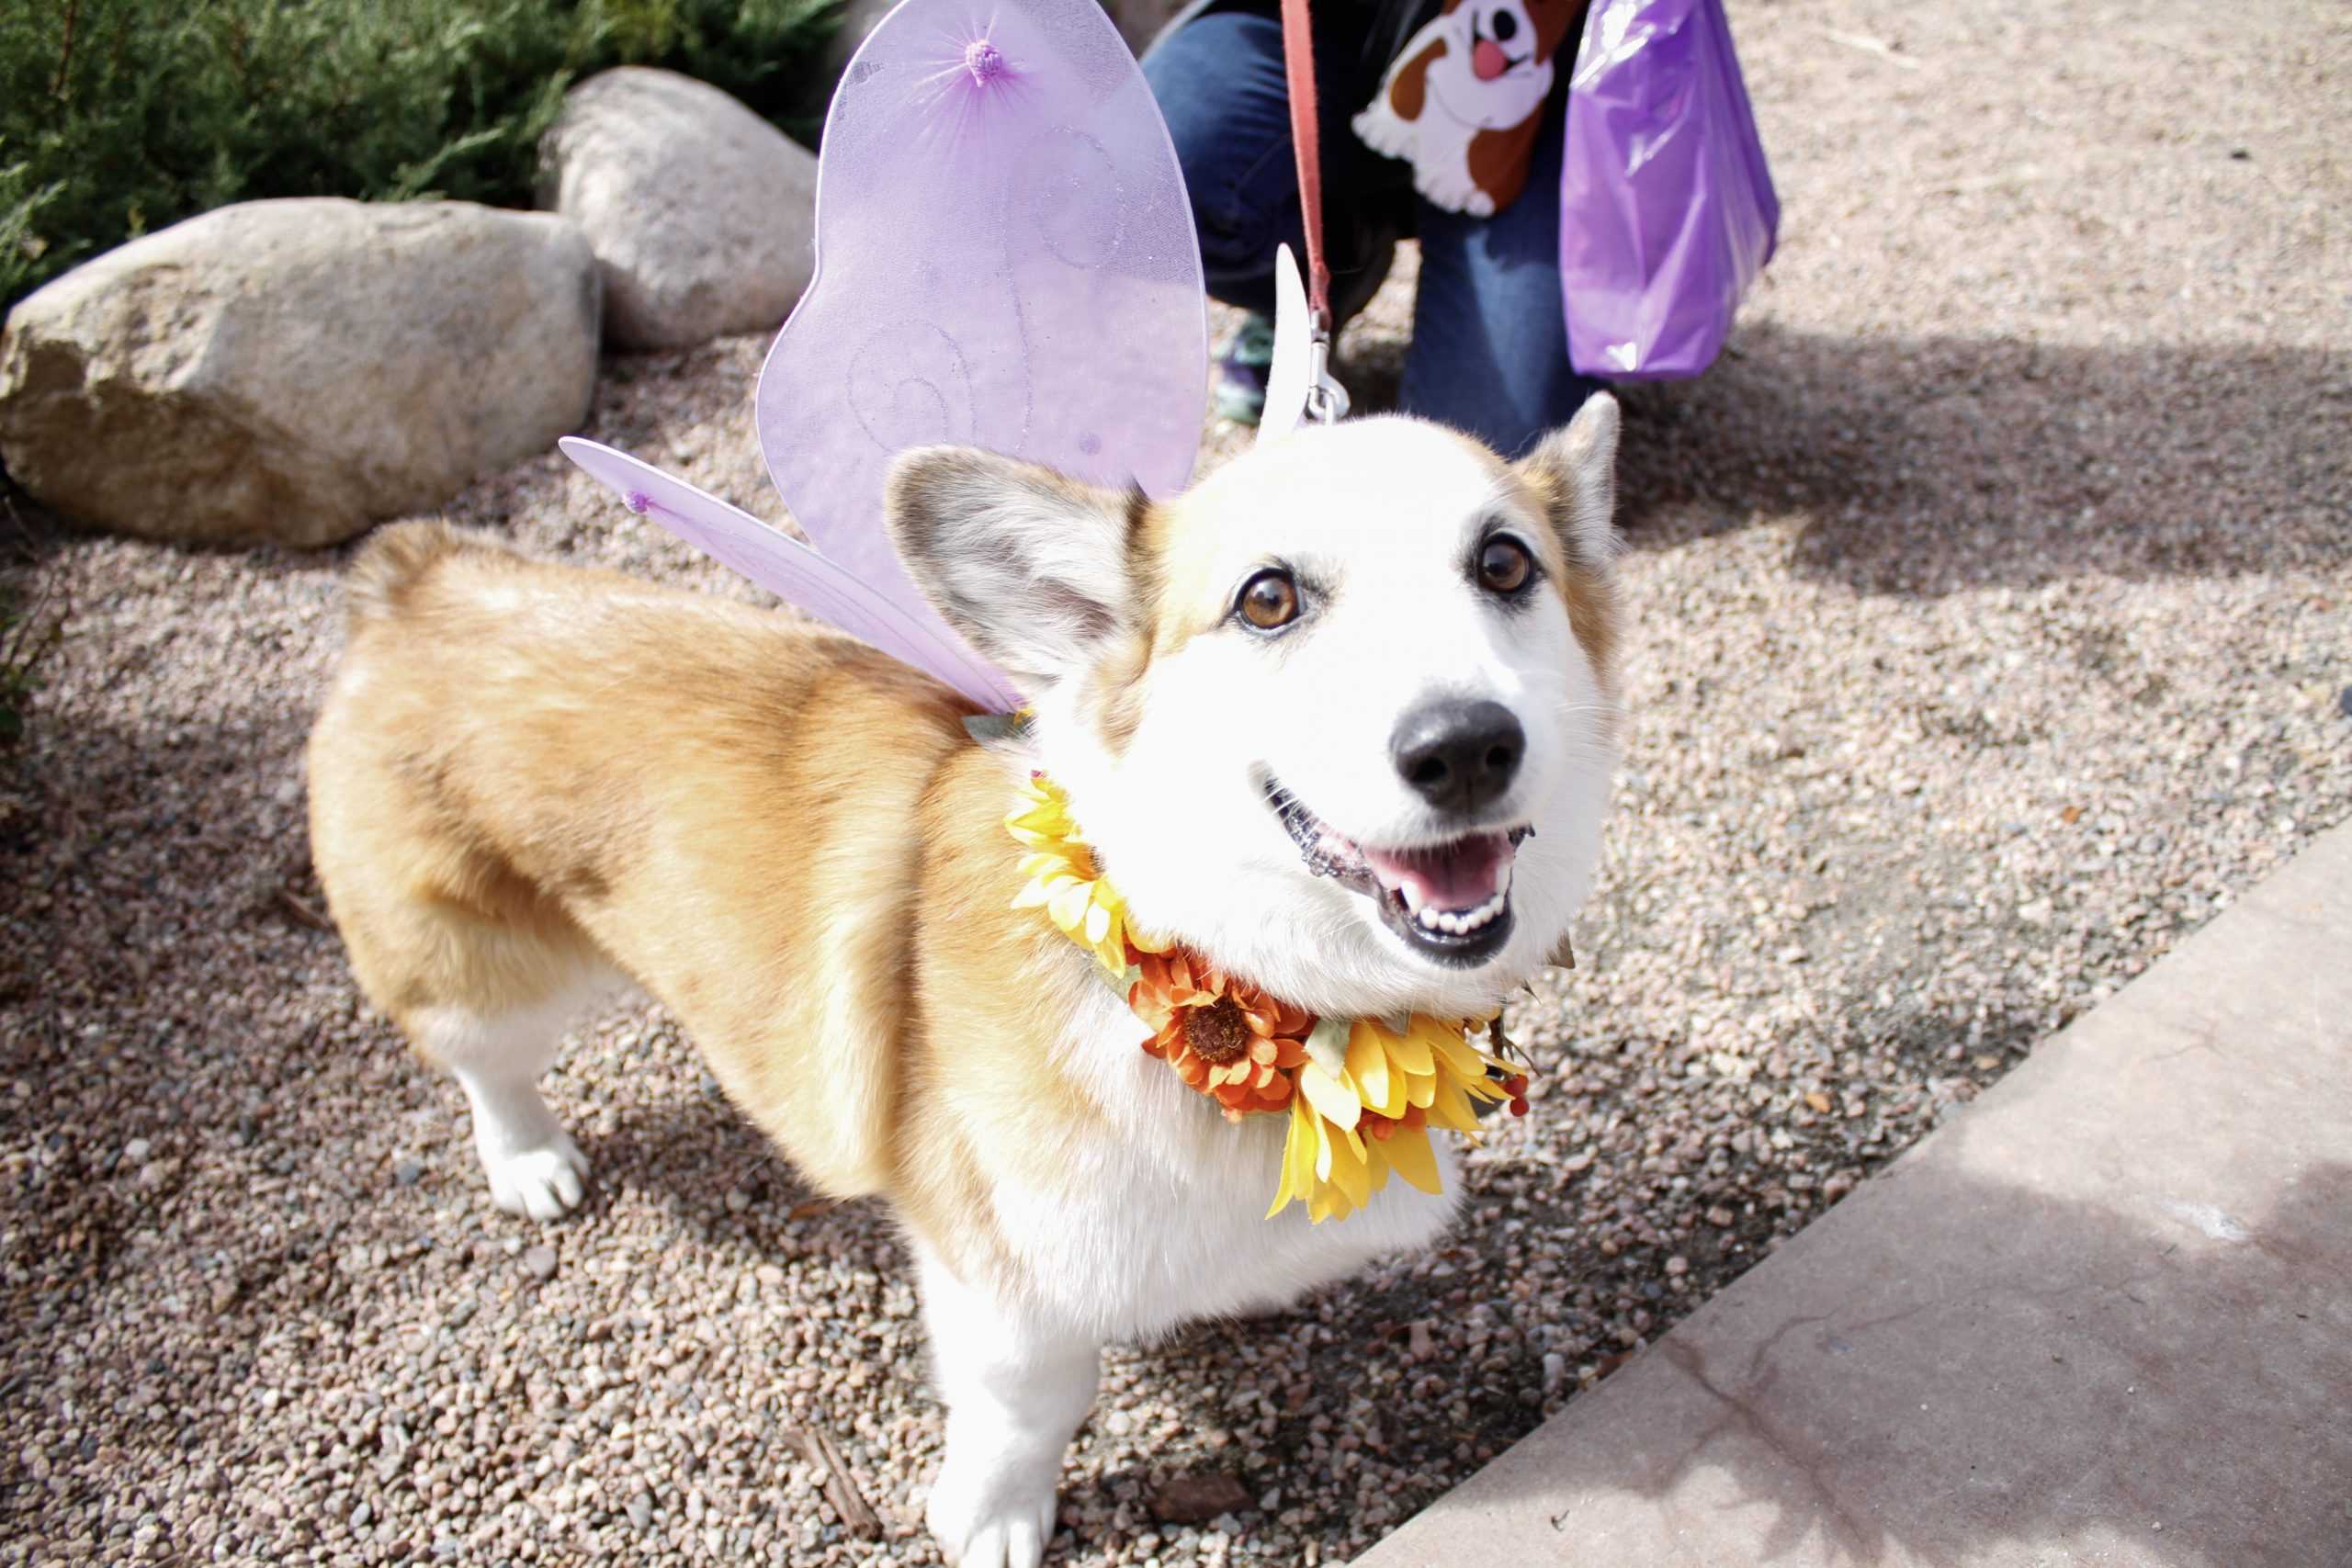 Every+dog+has+its+day%2C+and+Fort+Collins%E2%80%99+fourth+annual+Tour+de+Corgi+was+a+chance+for+a+whole+breed+to+get+the+spotlight.%0D%0A%0D%0AThe+morning+was+cold+in+Civic+Center+Park%2C+though+as+the+dogs+gathered